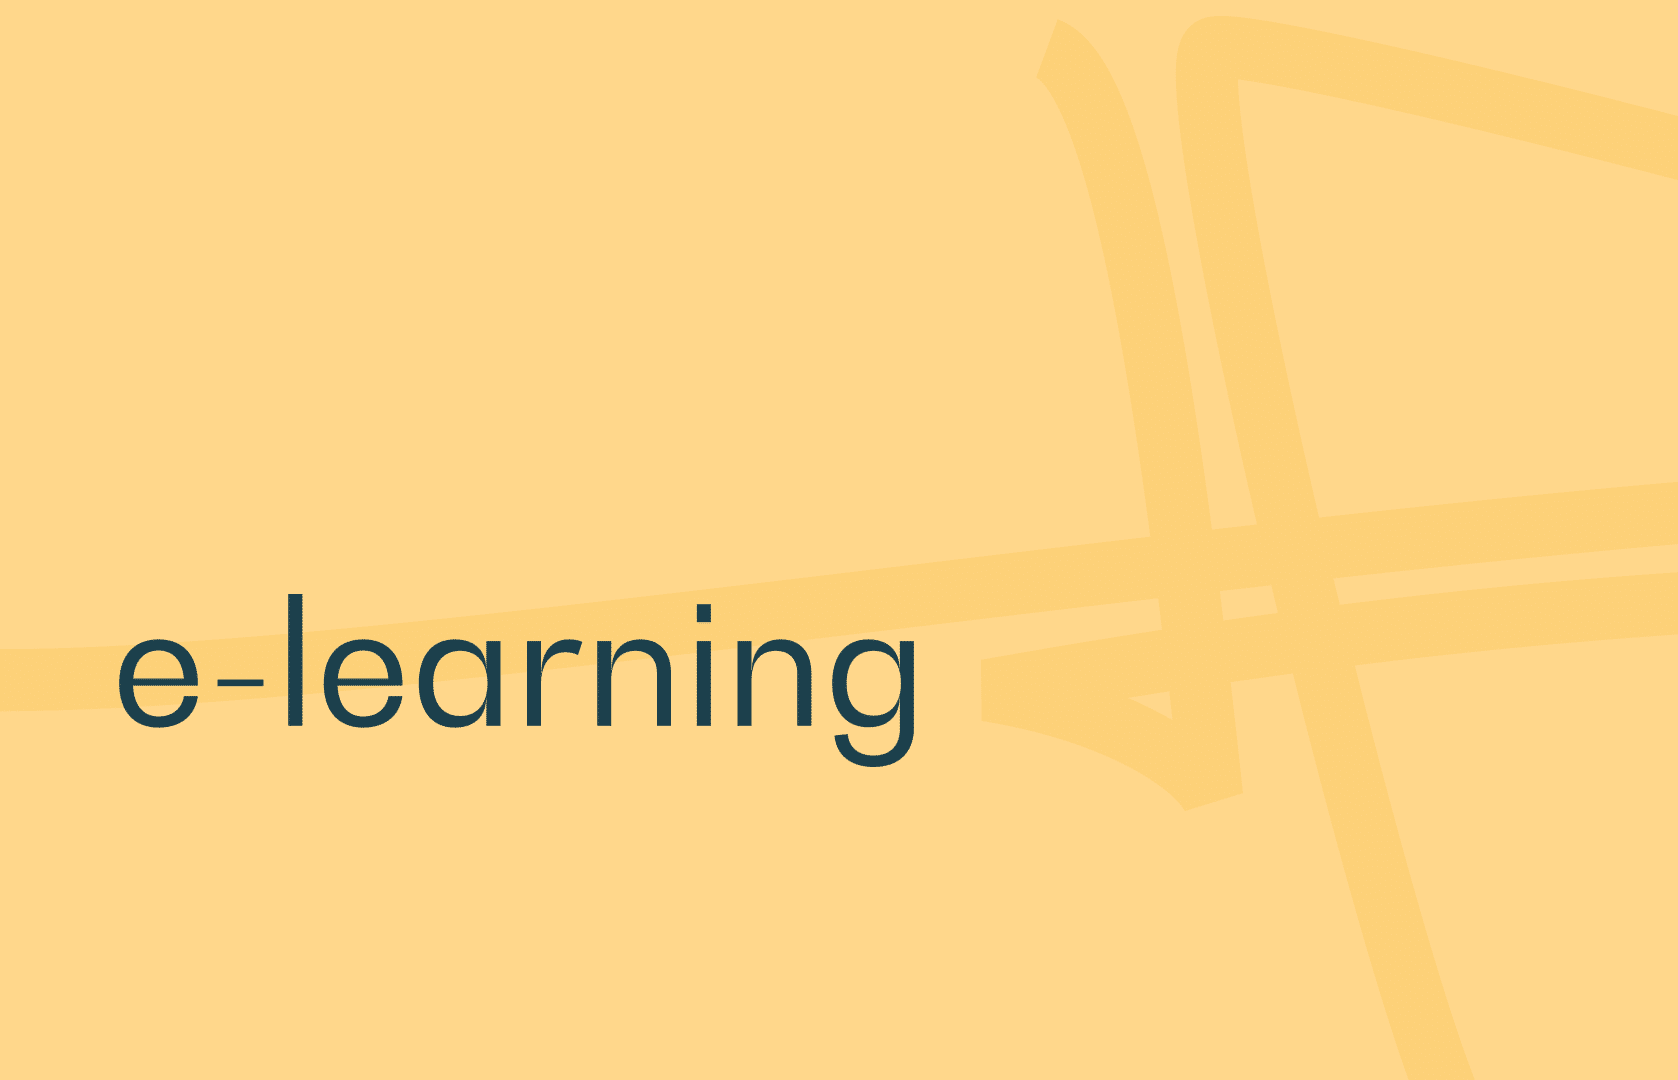 e-learning definition